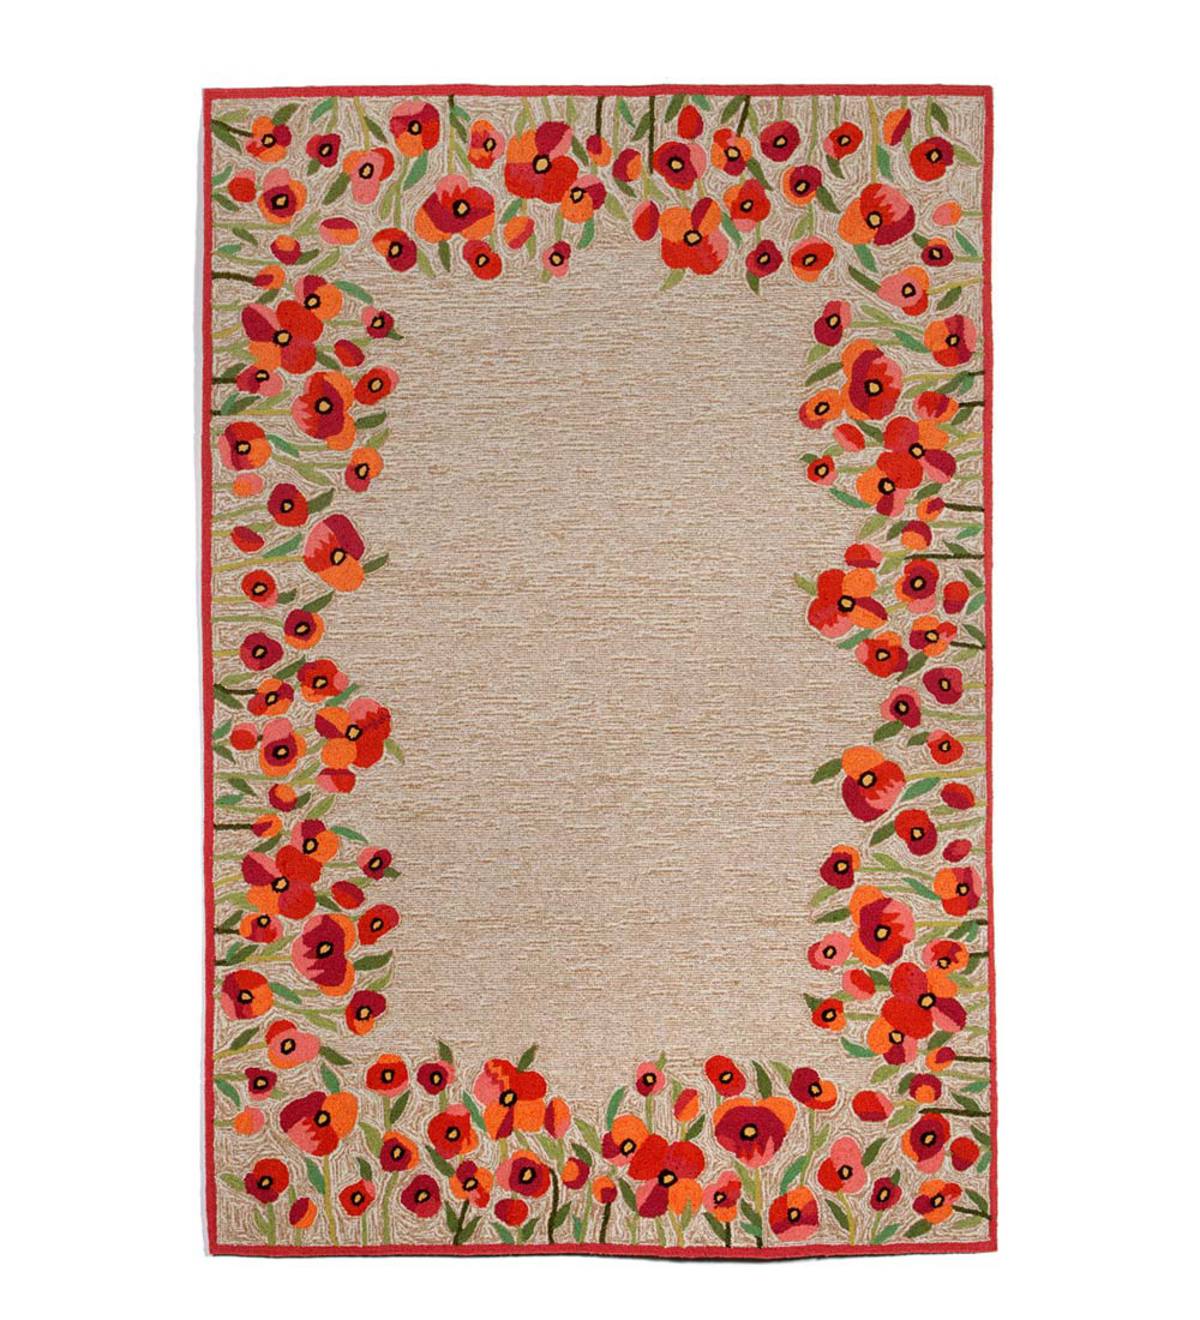 Red Poppies Border Accent Rug, 7'6"W x 9'6"L